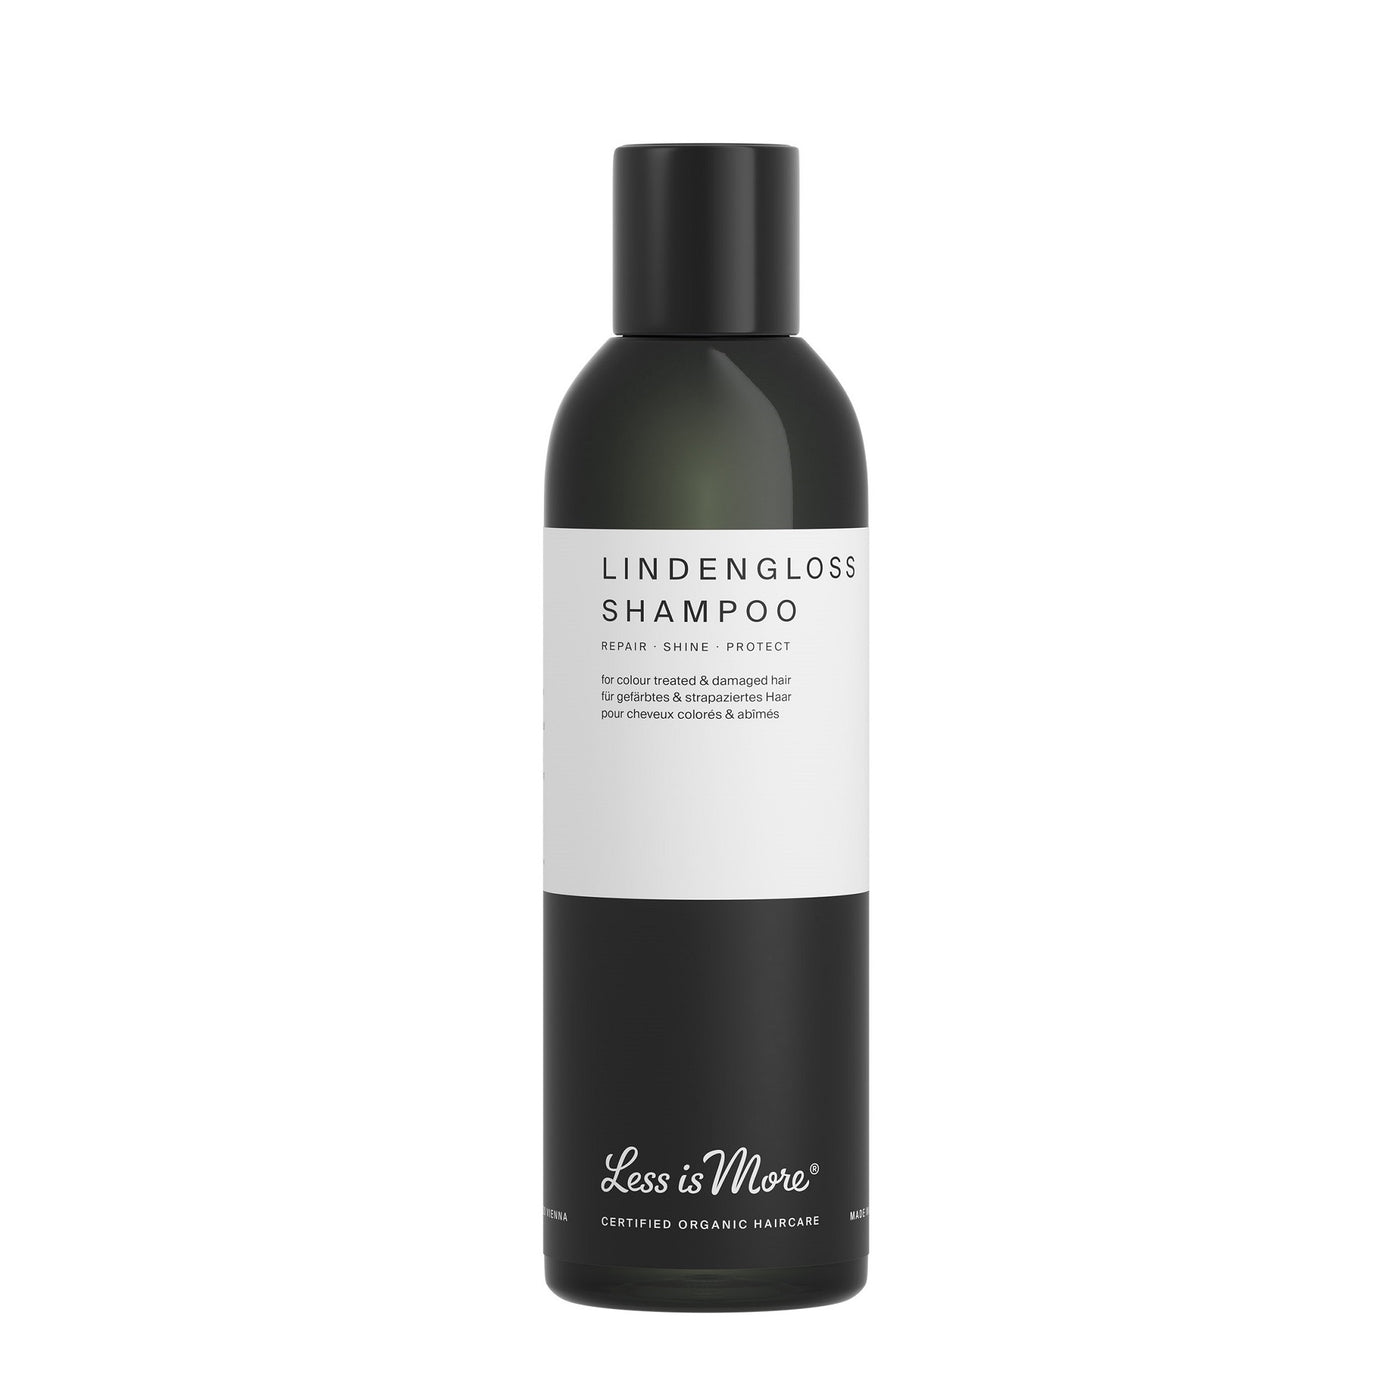 Less is More Lindengloss Shampoo